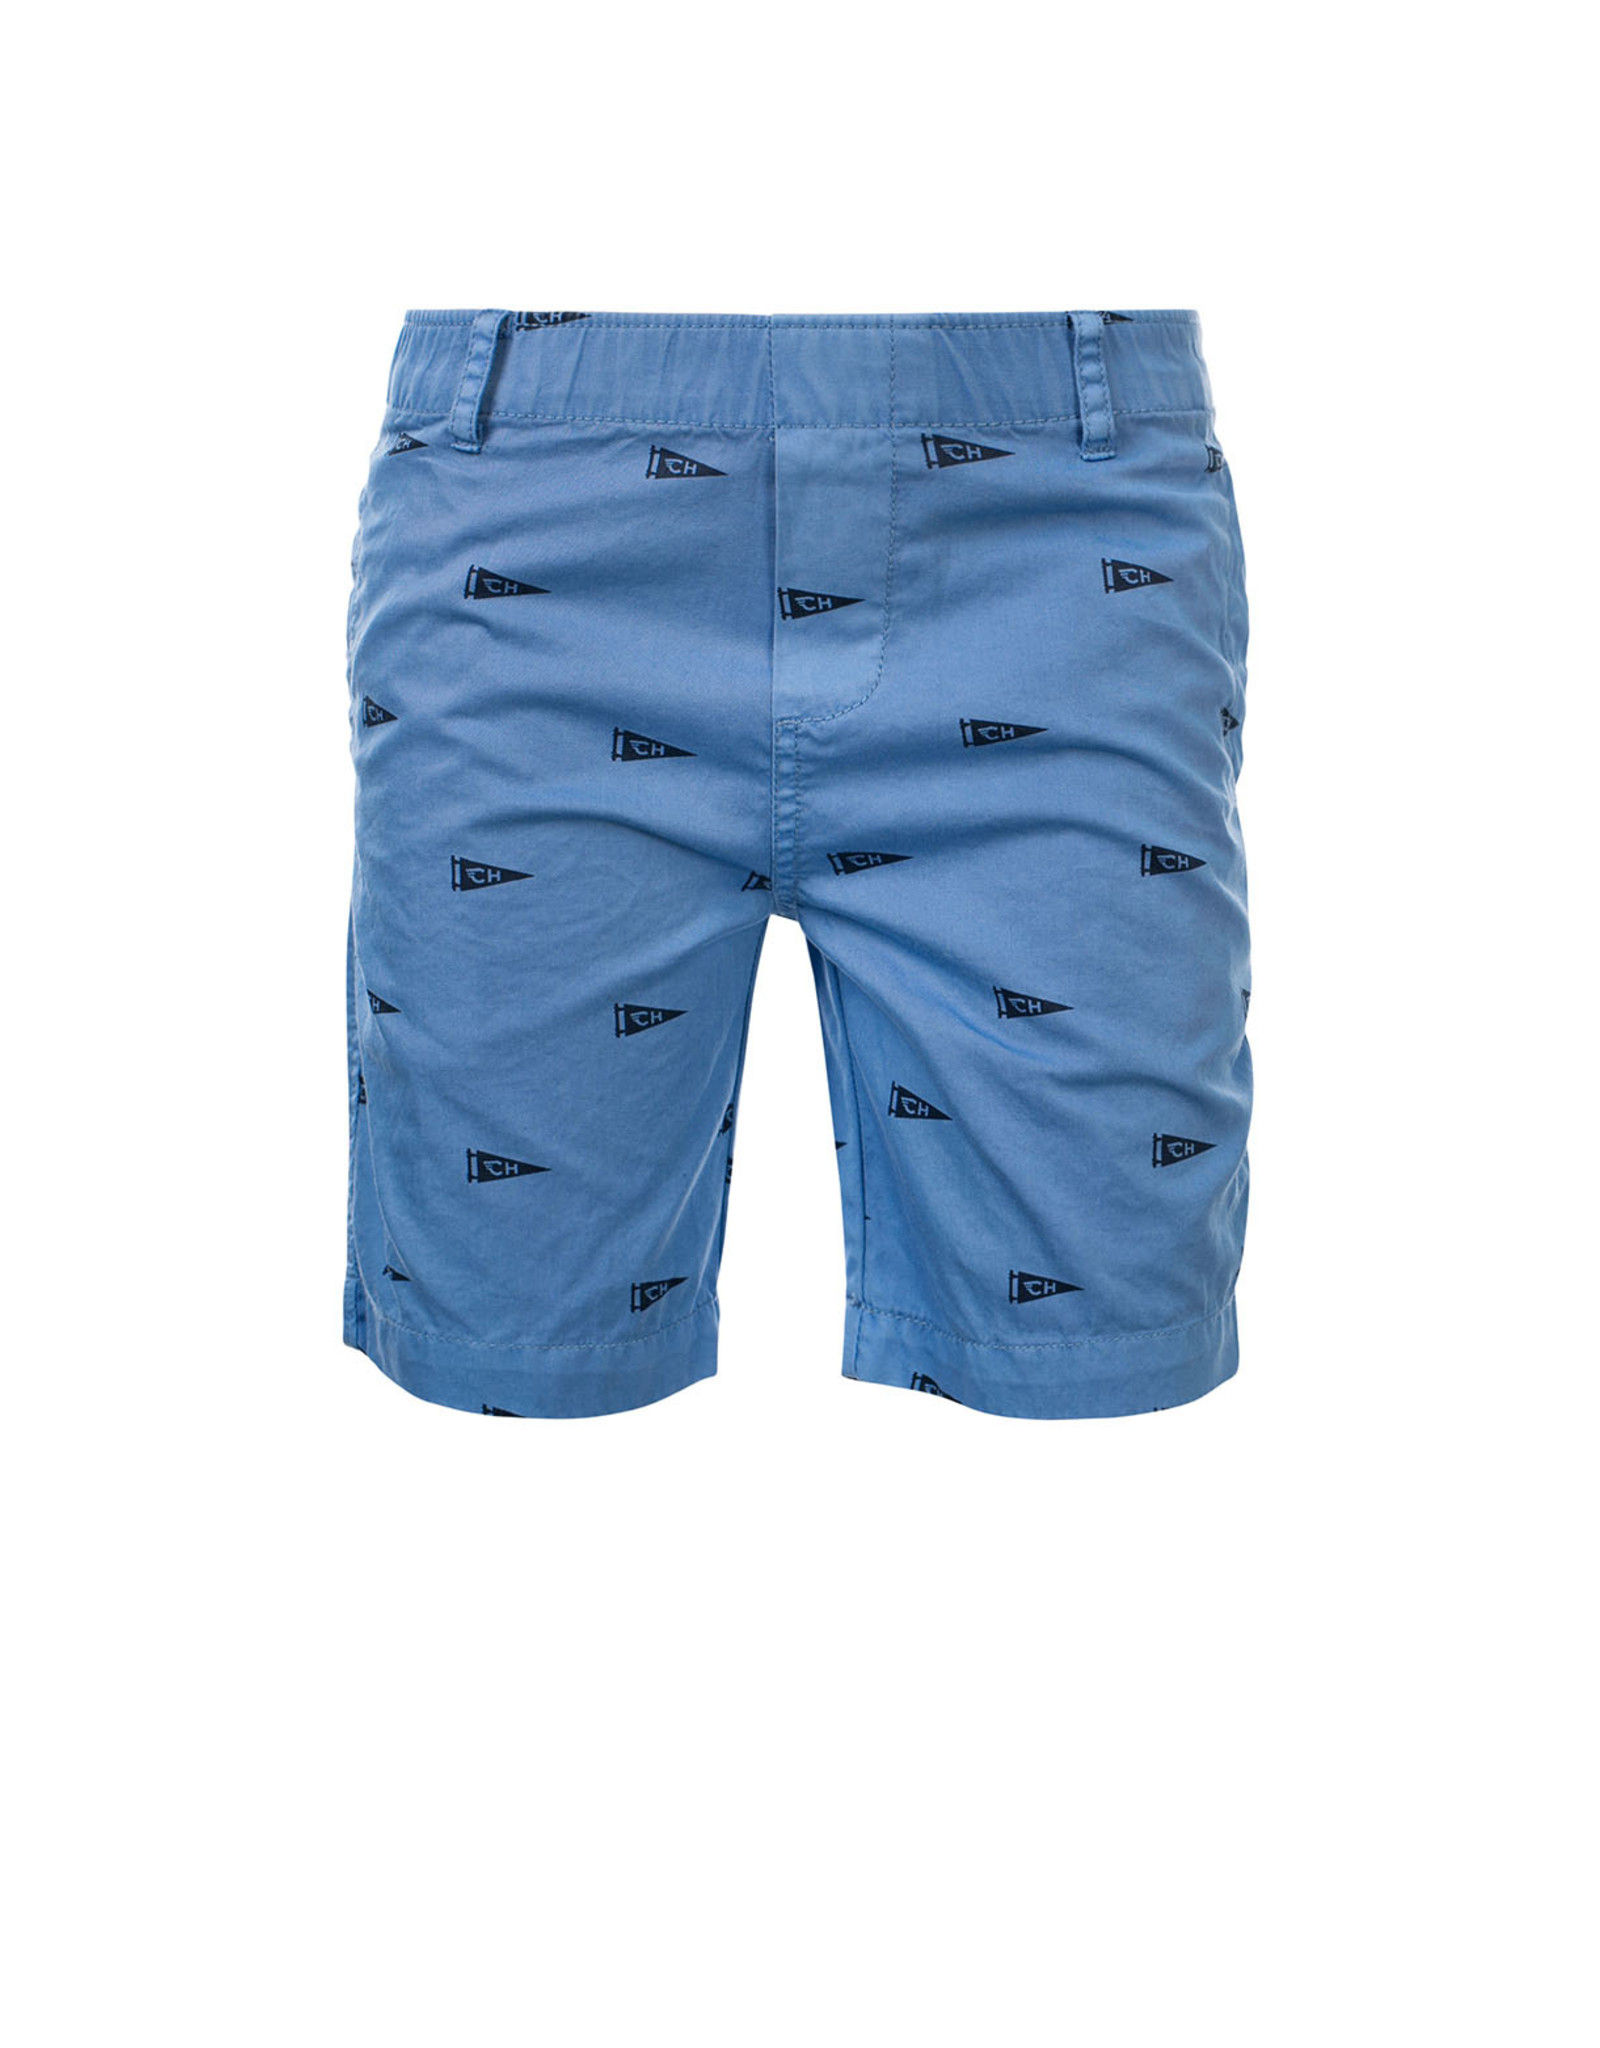 Common Heroes DINO CHINO SHORTS  with AO print river